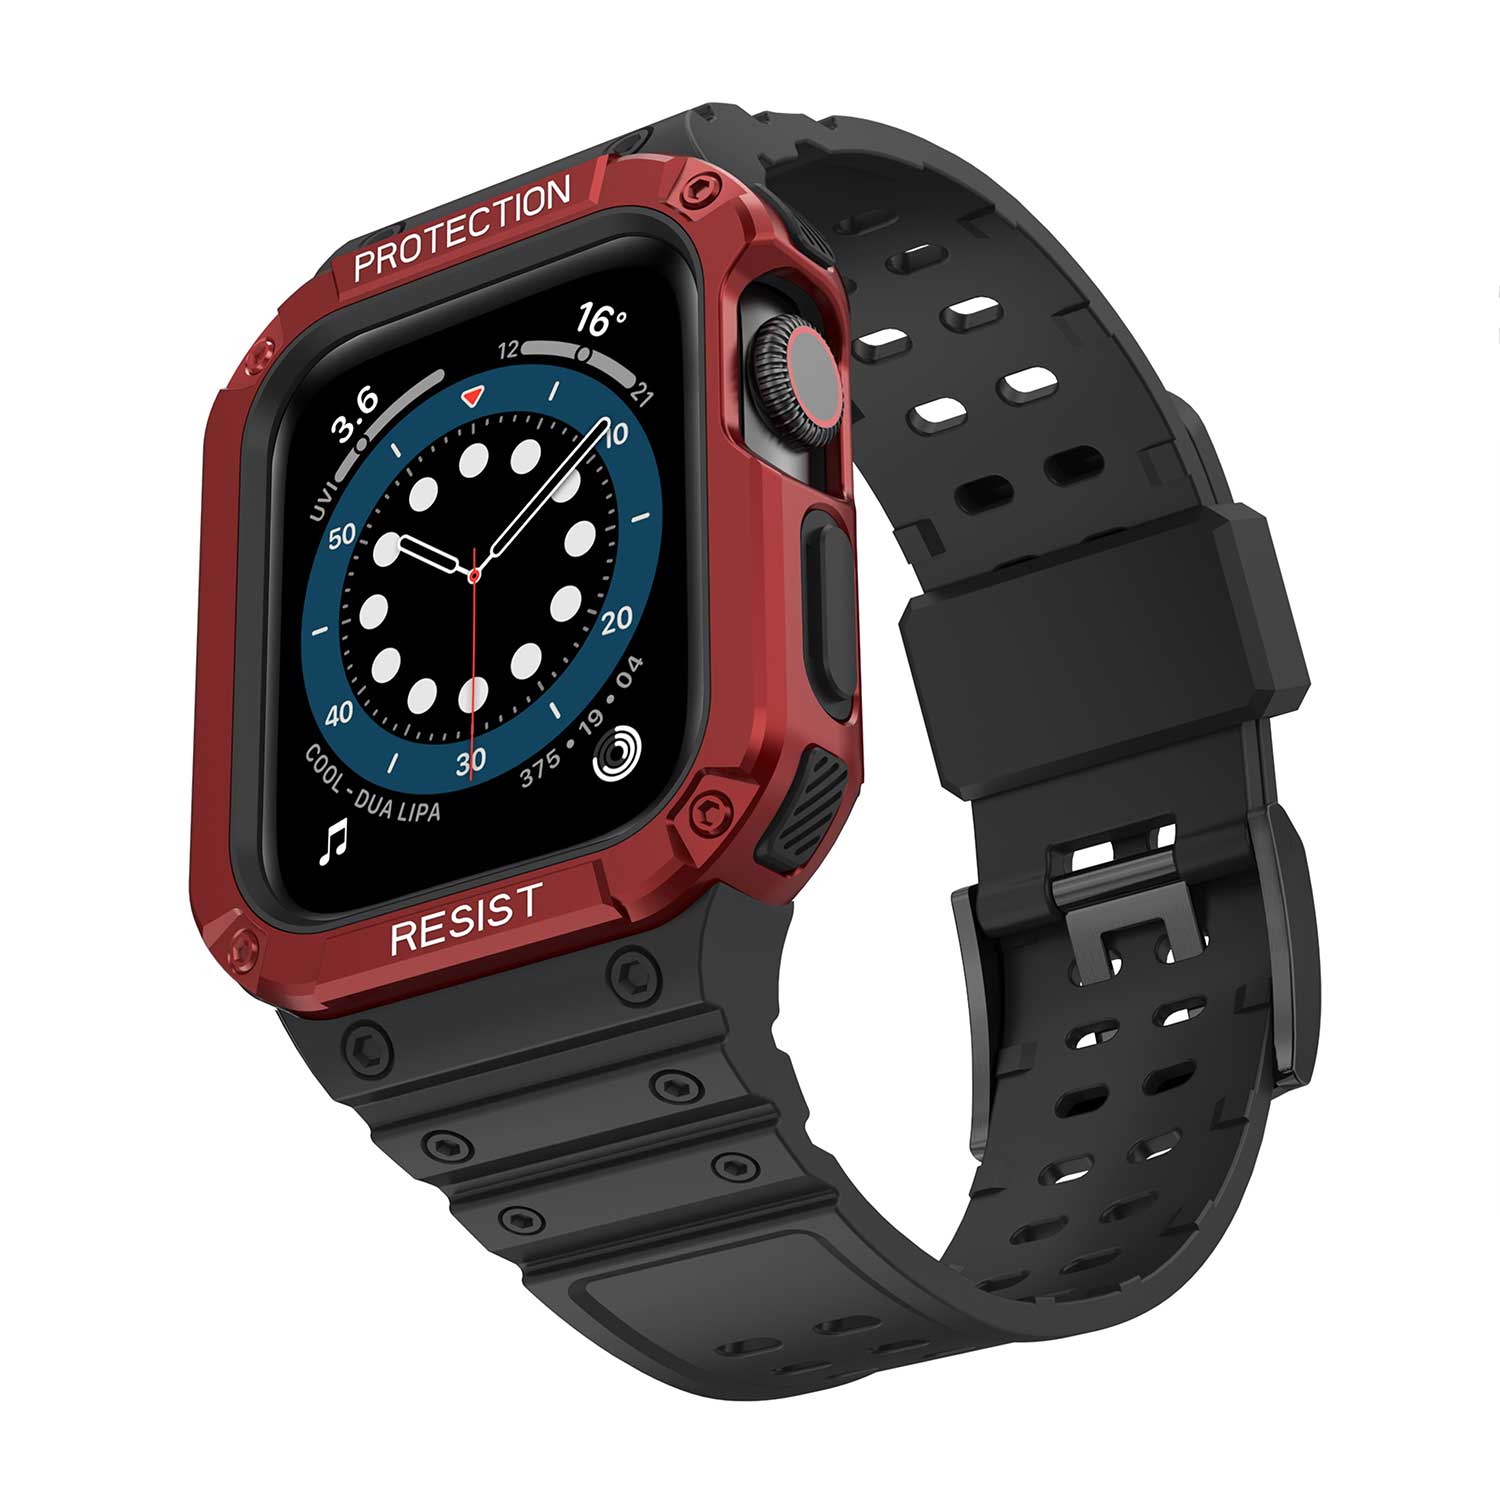 Tough On Apple Watch Band with Case Series 4 / 5 / 6 / SE 40mm Rugged Protection Black/Red